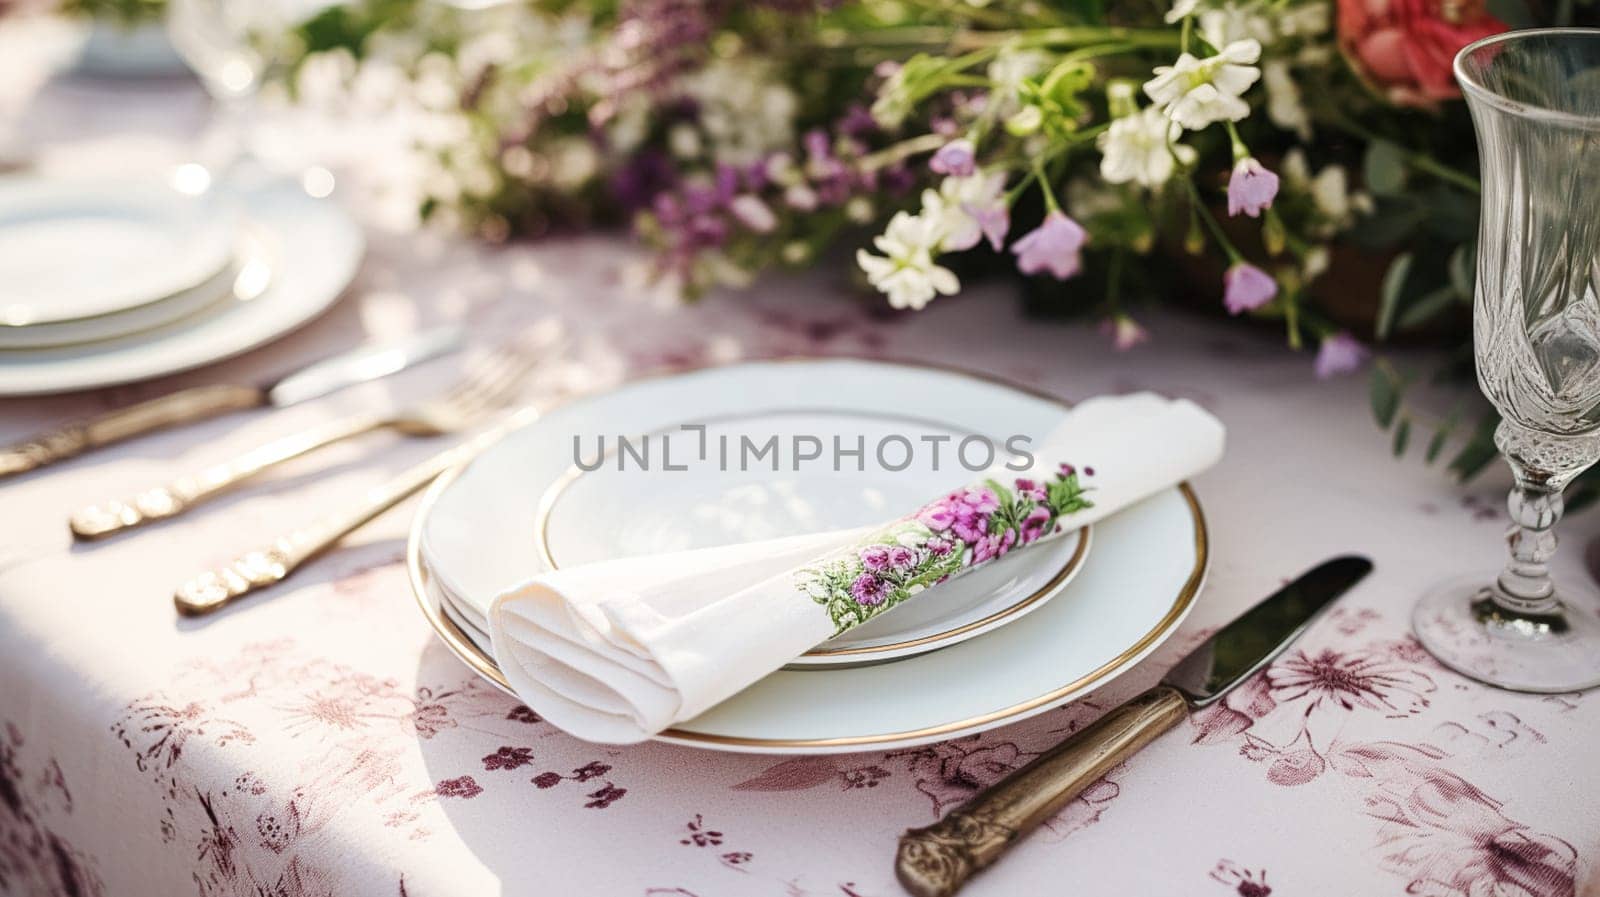 Table decor, holiday tablescape and dinner table setting in countryside garden, formal event decoration for wedding, family celebration, English country and home styling by Anneleven